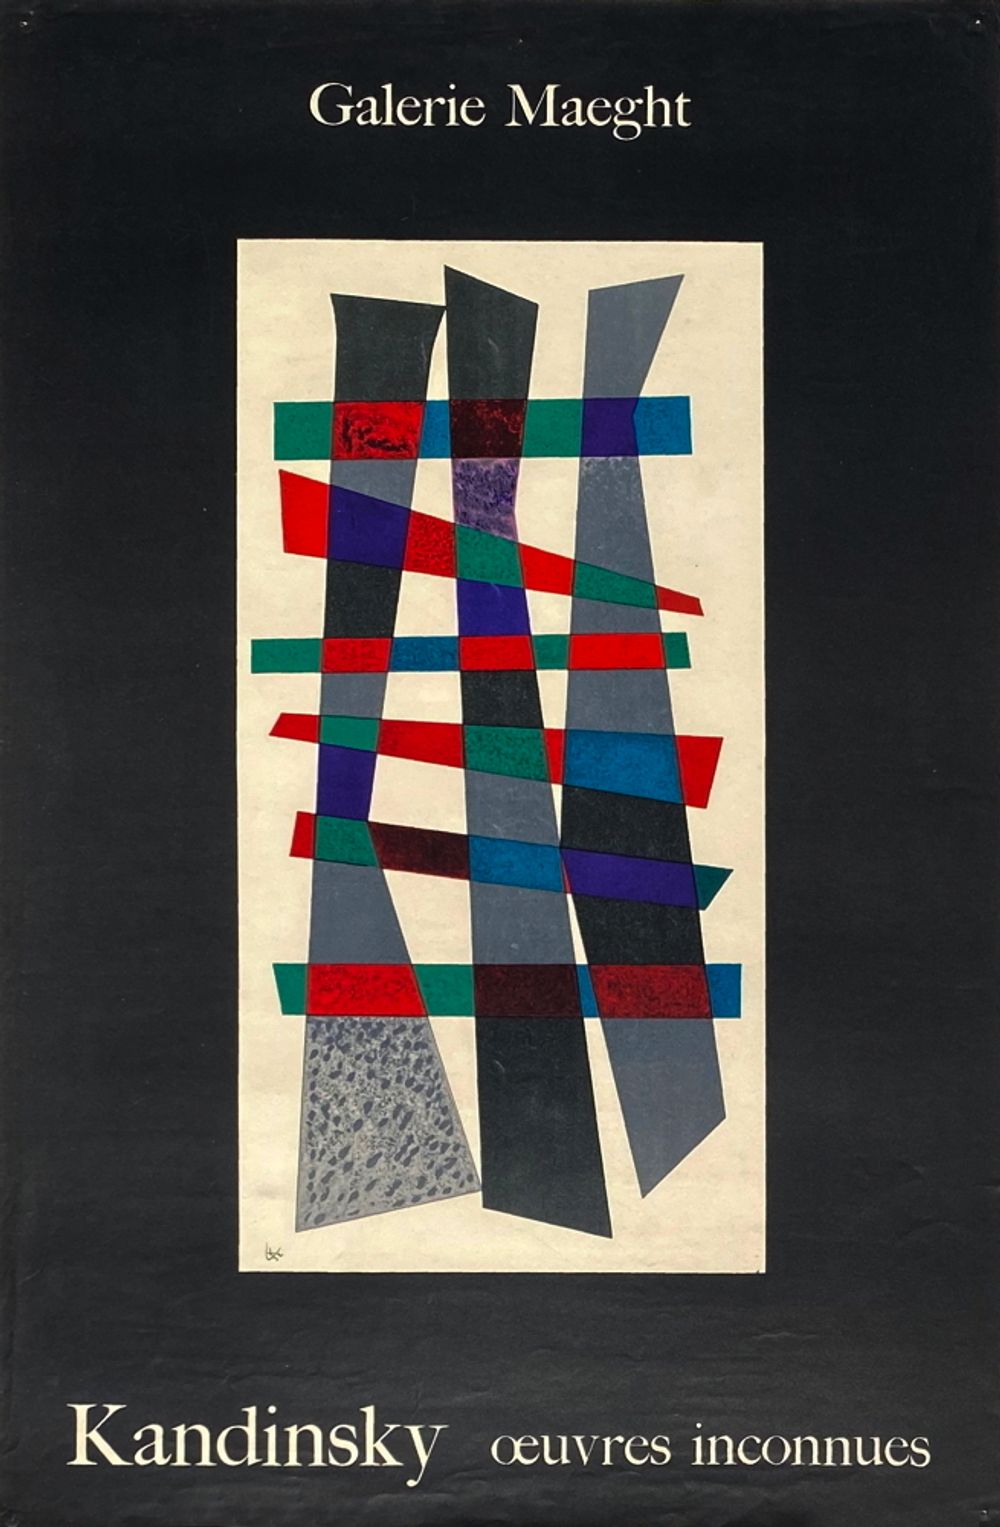 Expo 53 - Galerie Maeght - oeuvres inconnues